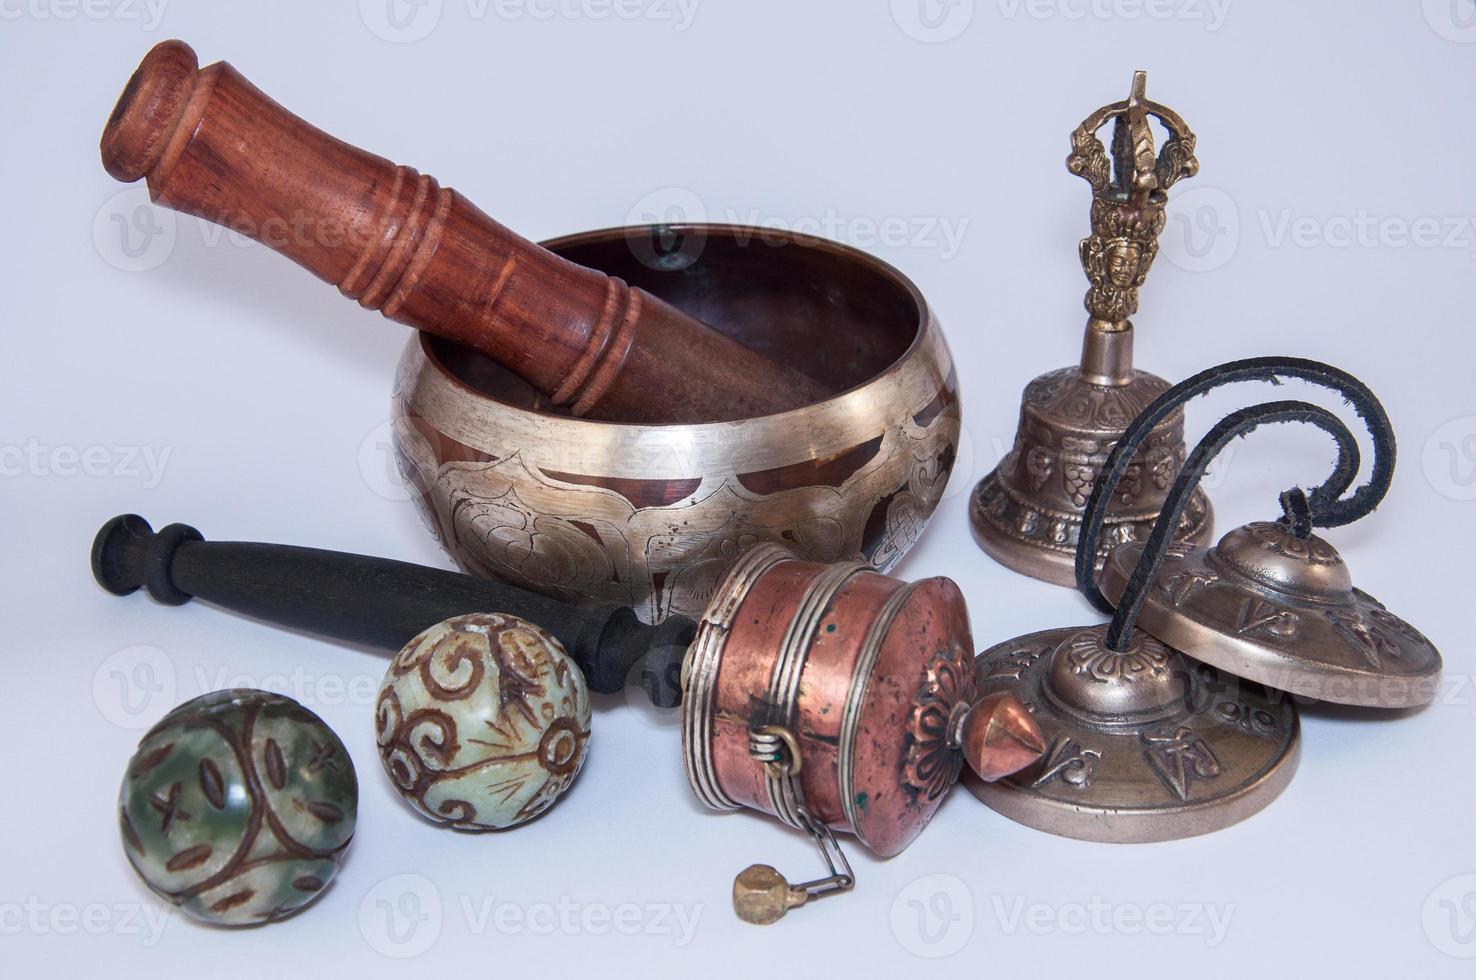 Buddhist religious objects for the performance of rituals photo